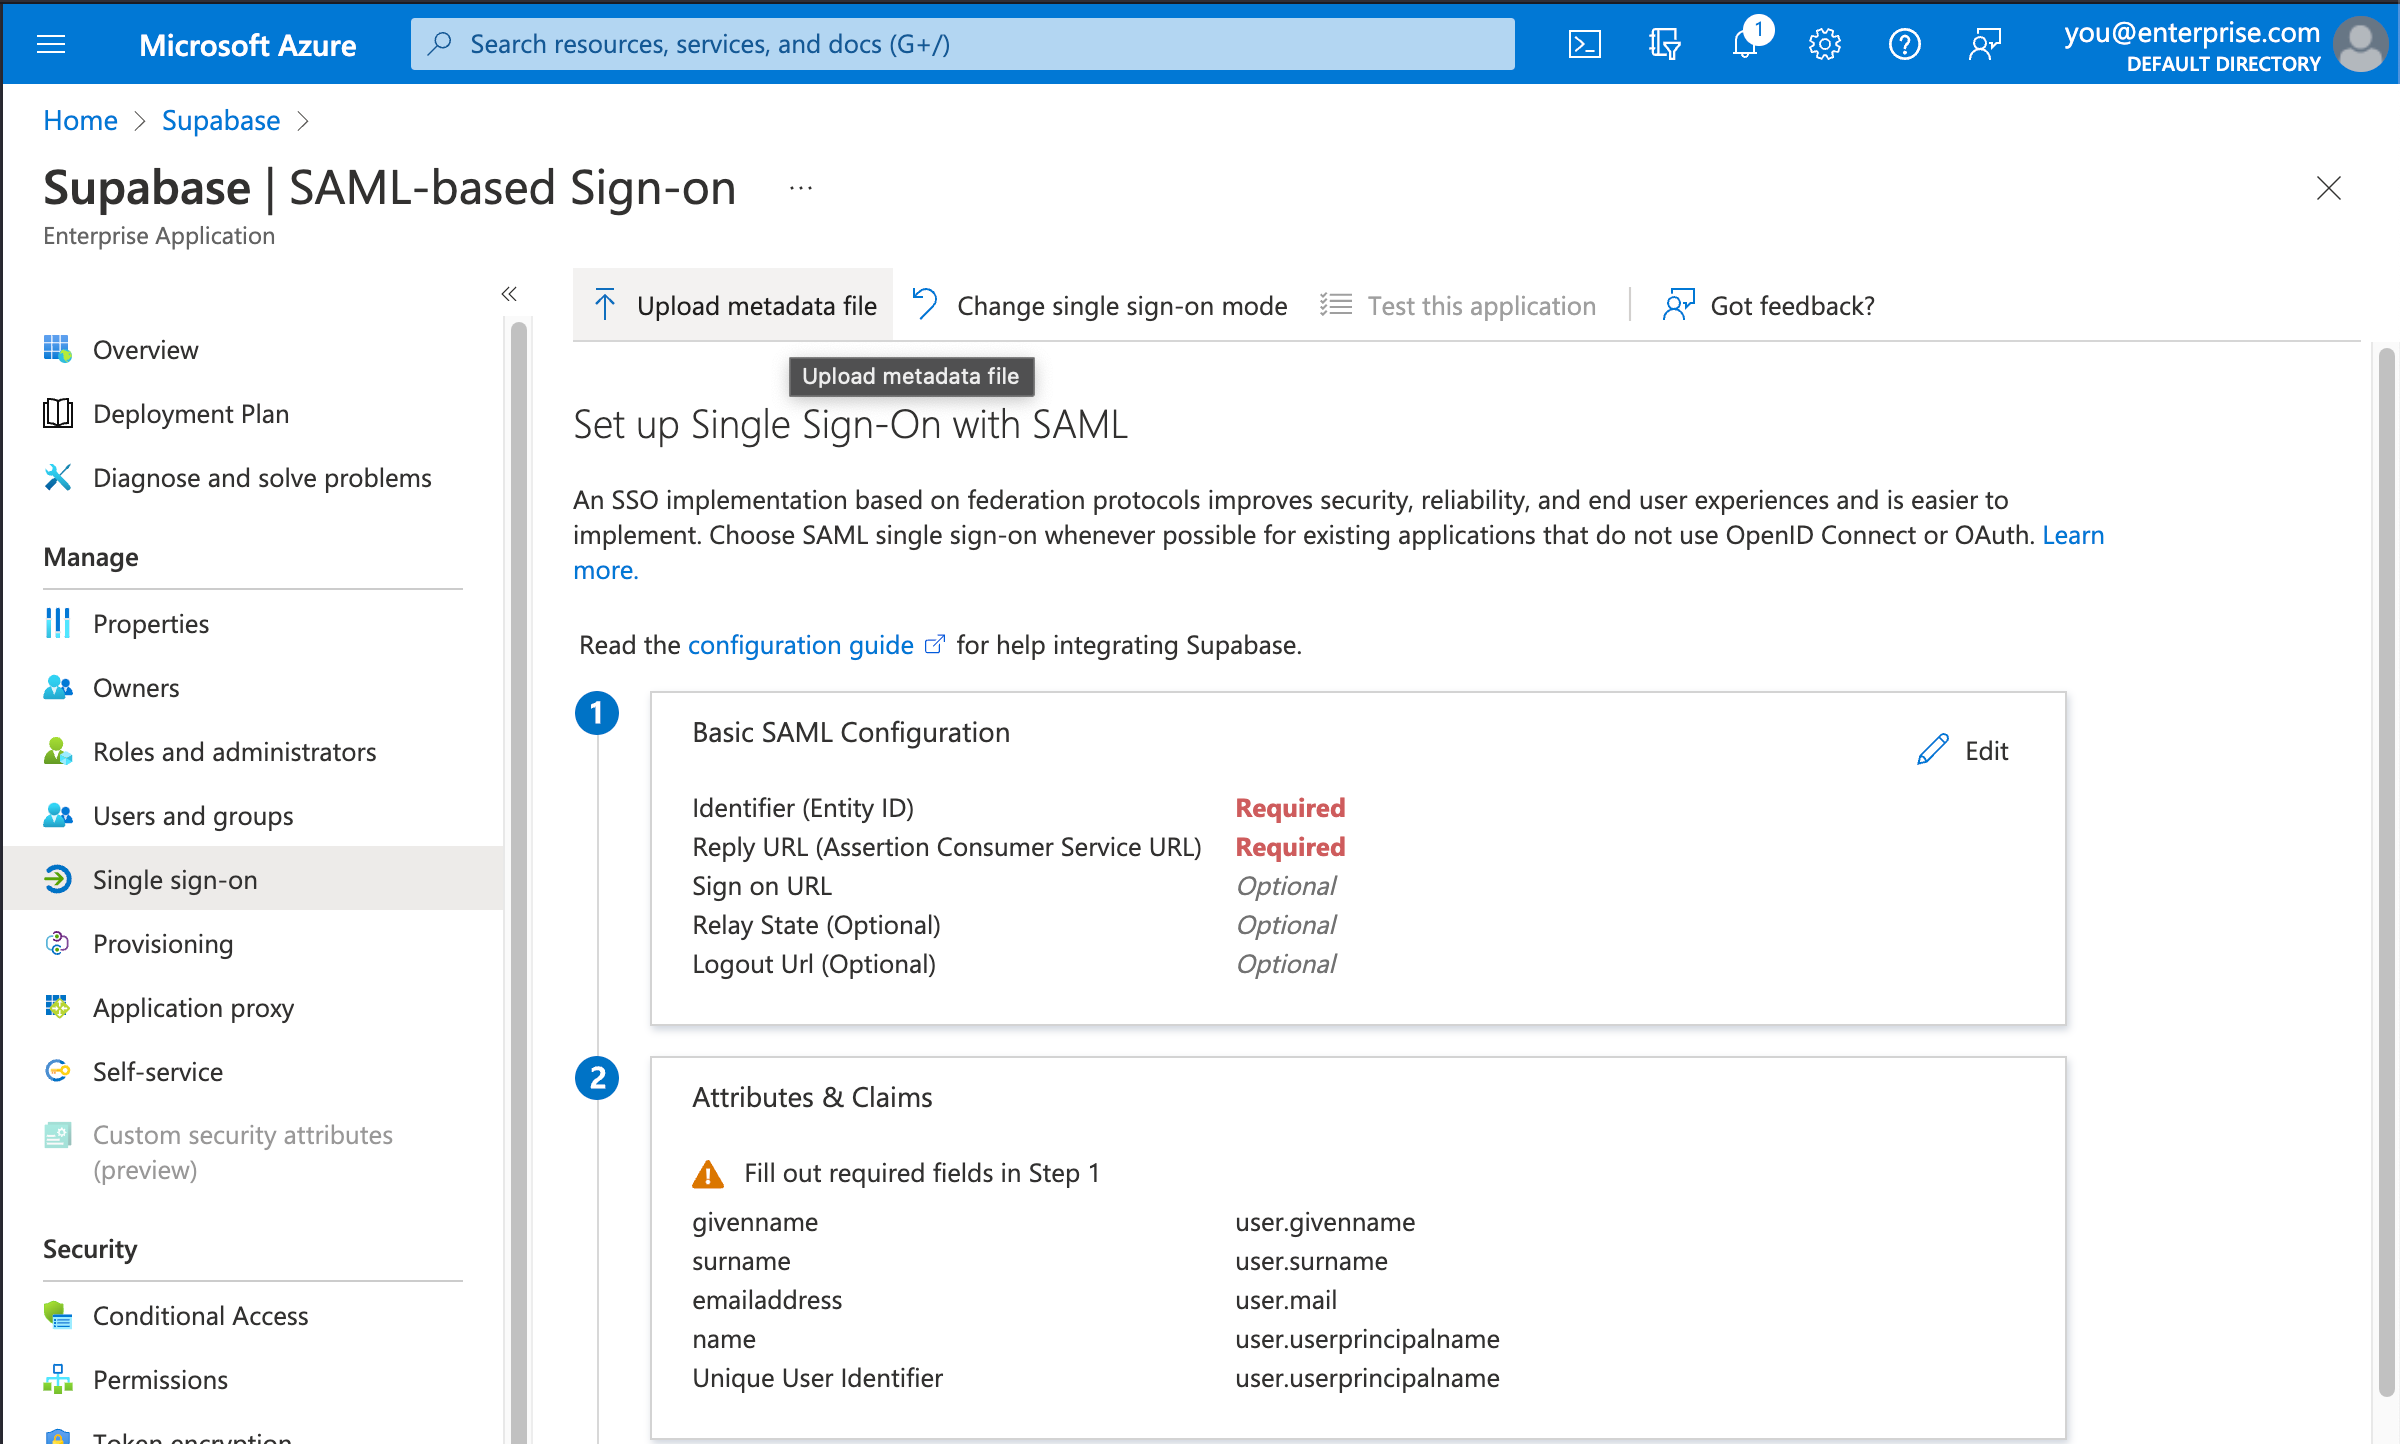 Azure AD console: Supabase application, SAML-based Sign-on screen,
selected Upload metadata file button